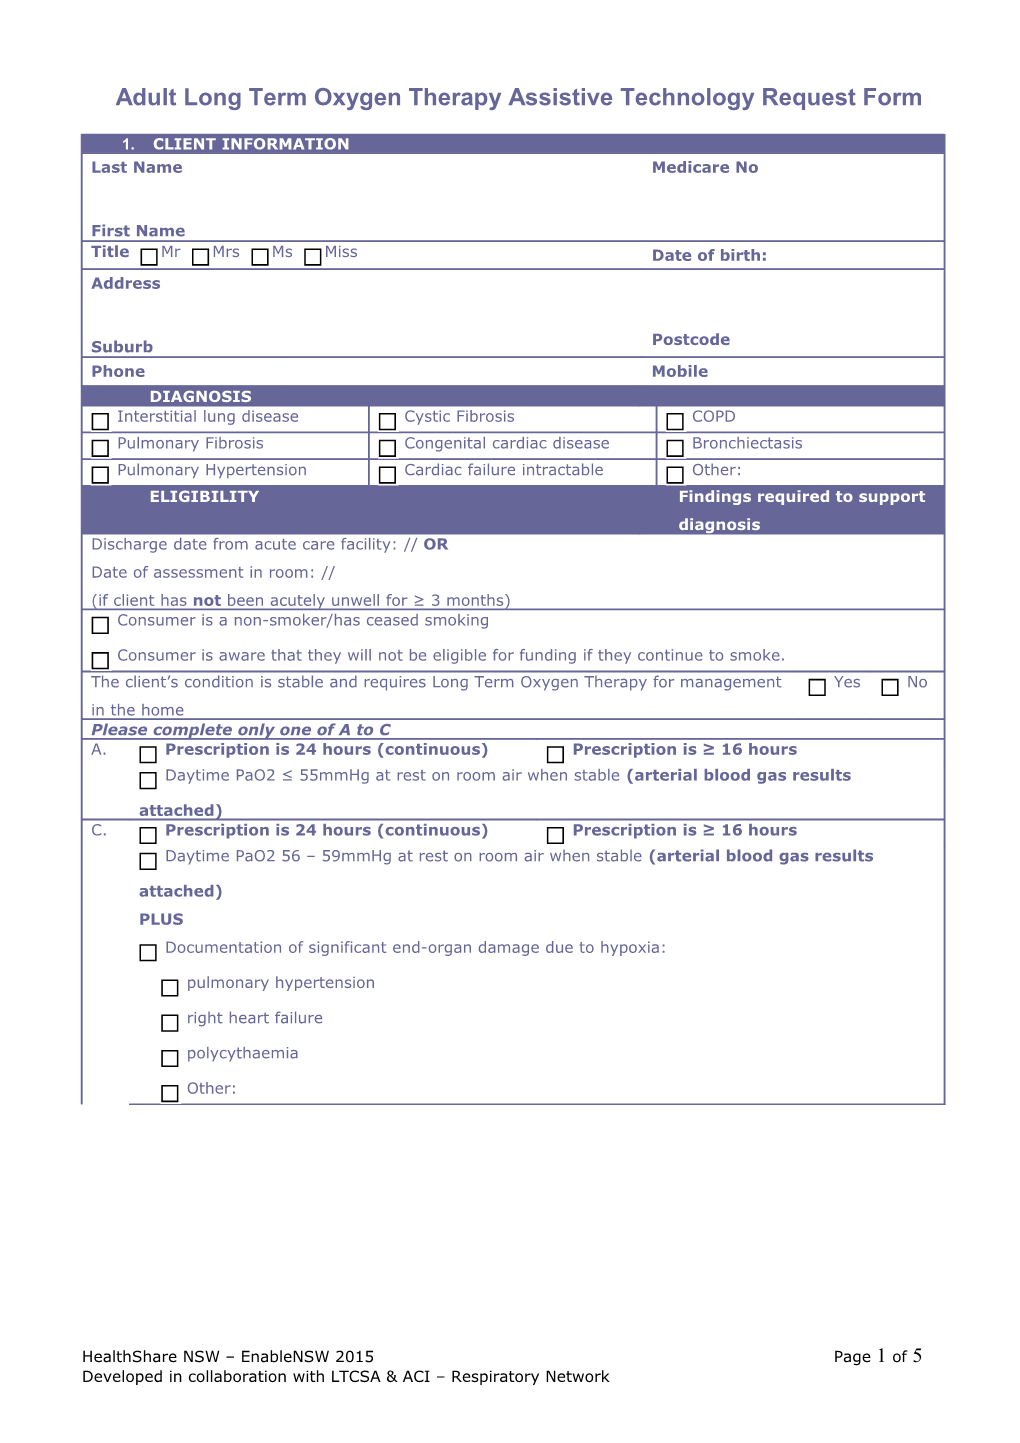 Adult Long Term Oxygen Therapy Assistive Technology Request Form